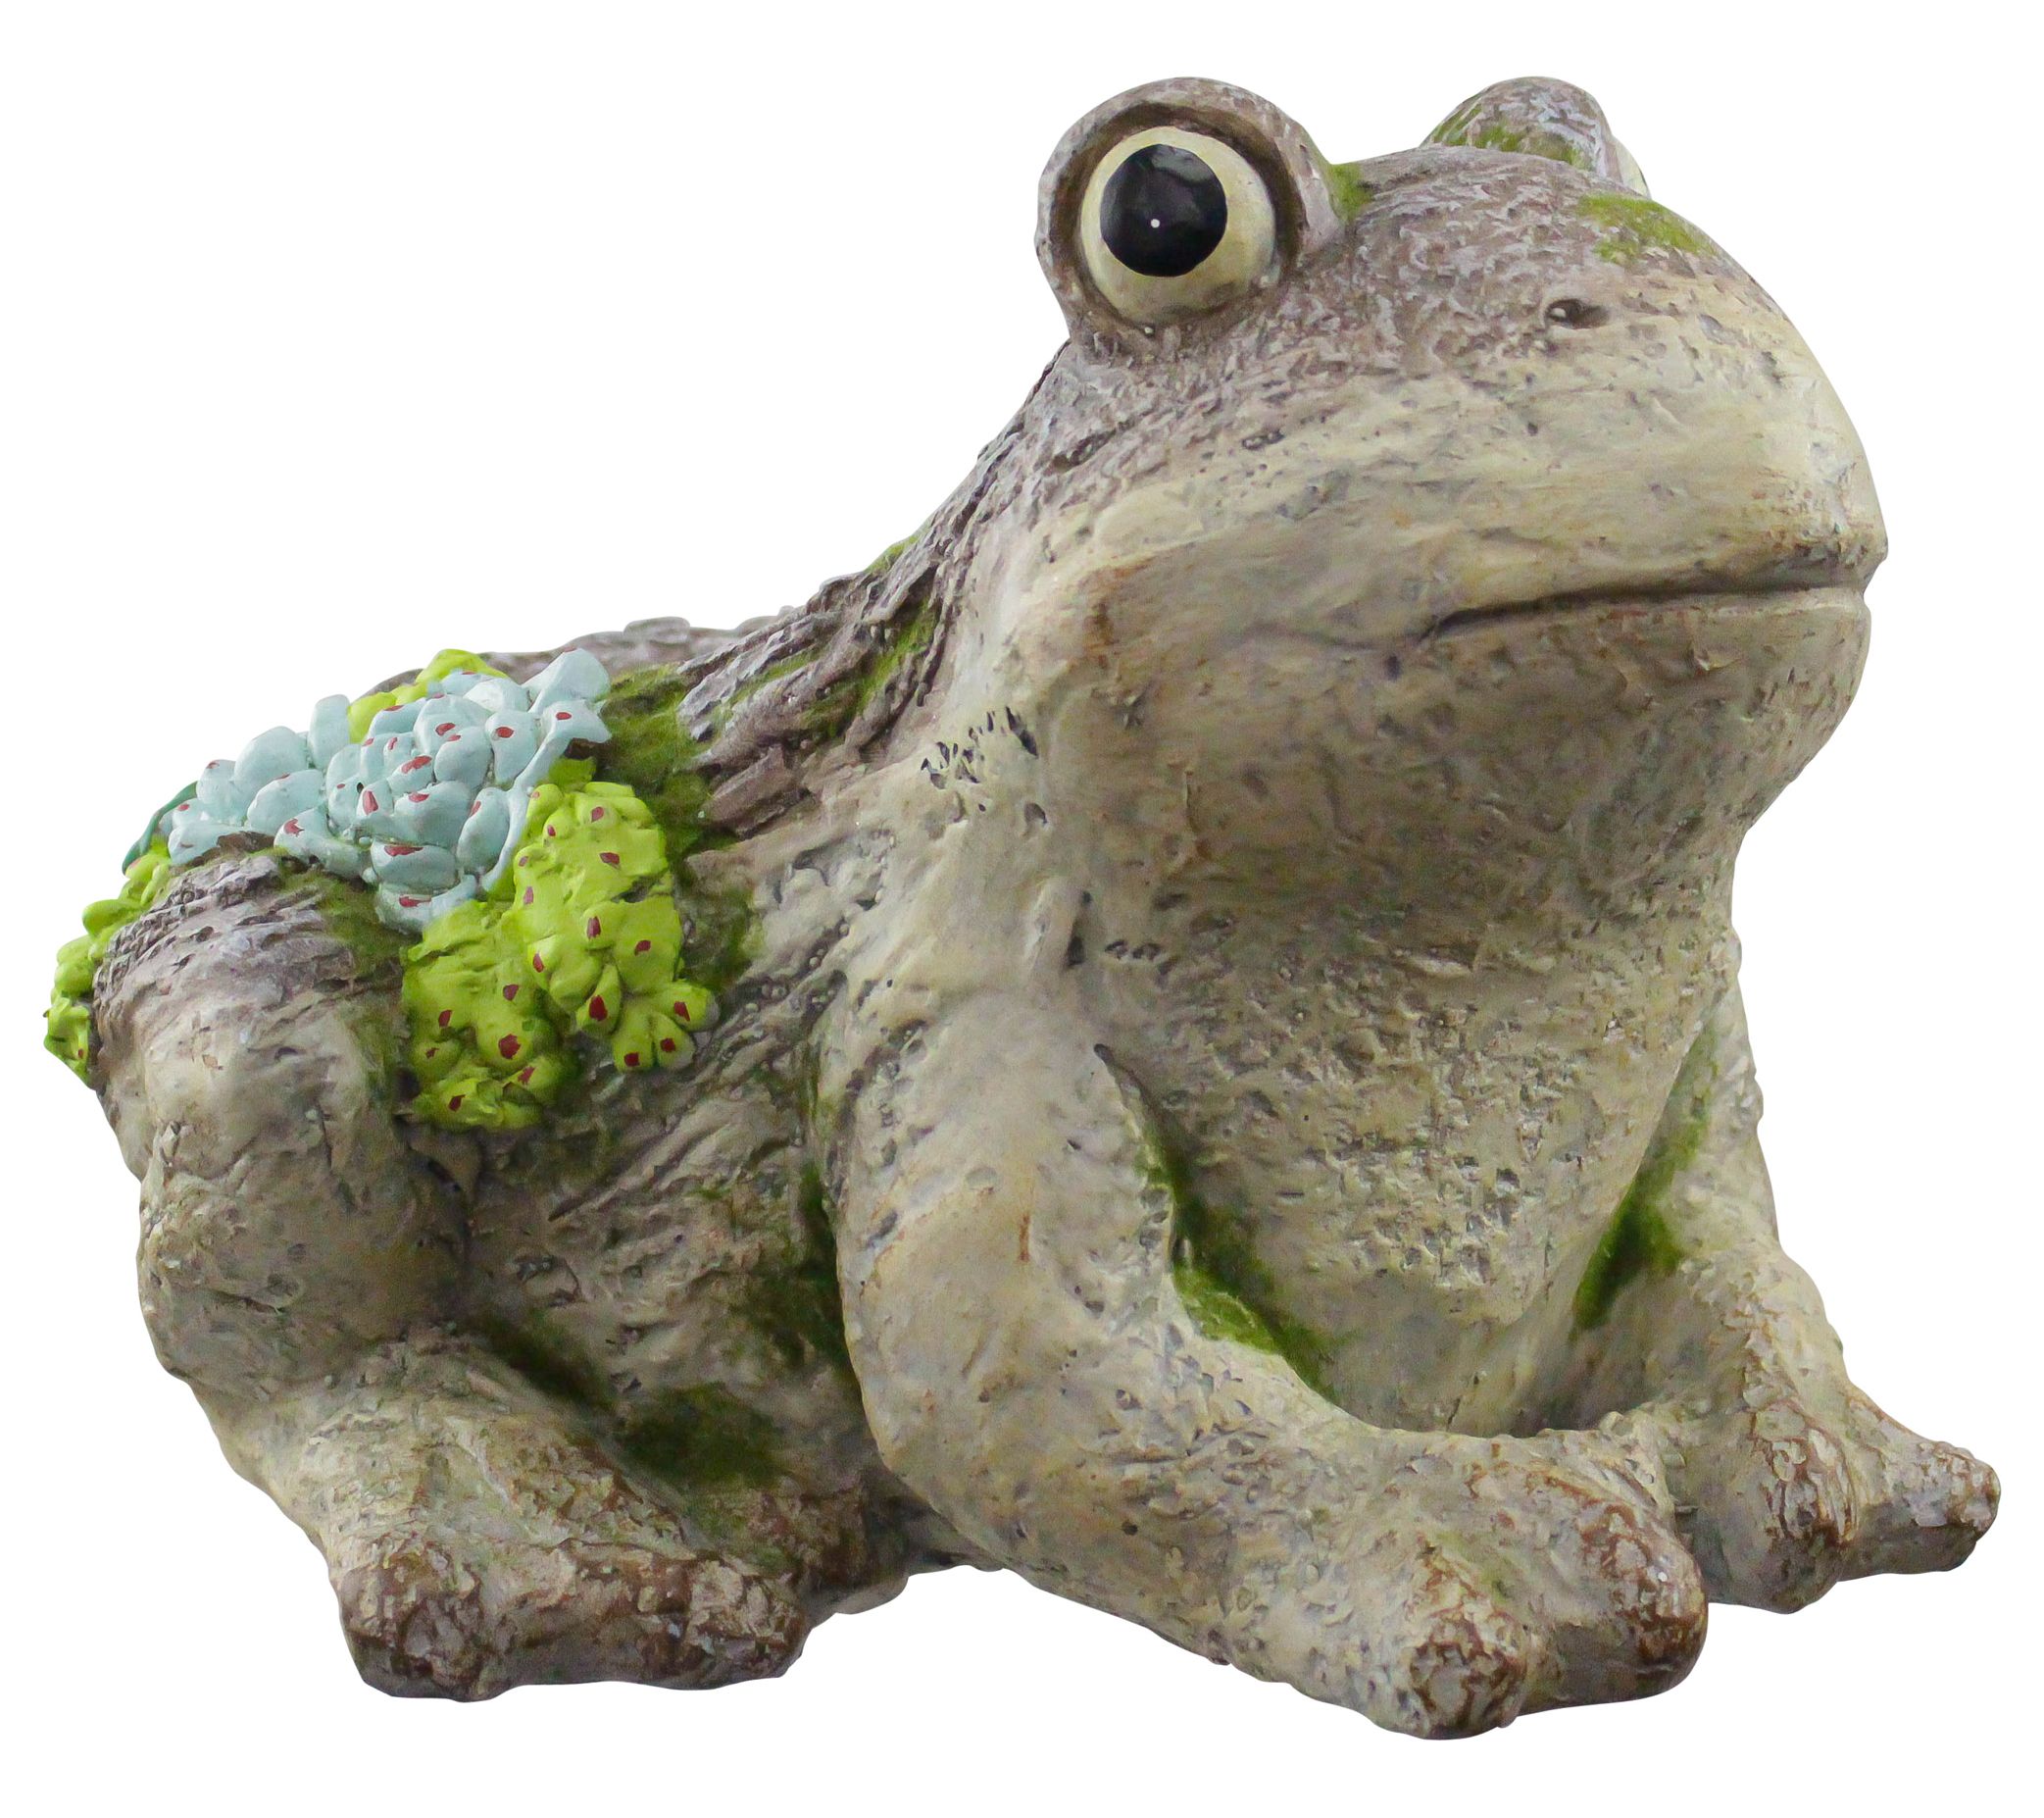 RCS Gifts Planter Frog Moss Accents 